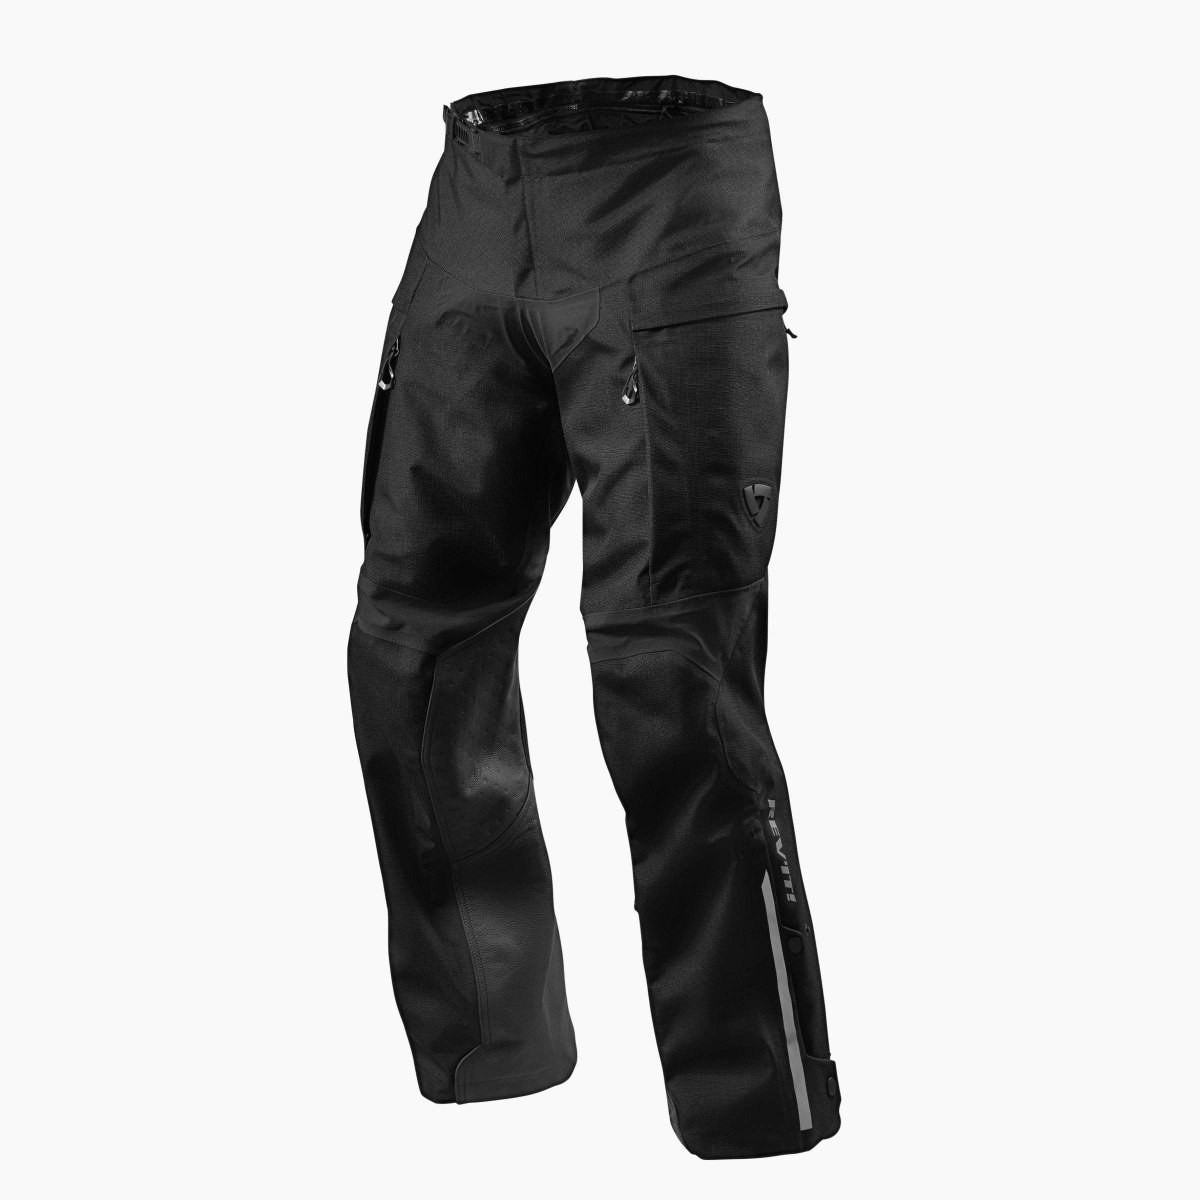 Image of REV'IT! Component H2O Standard Black Motorcycle Pants Talla XL